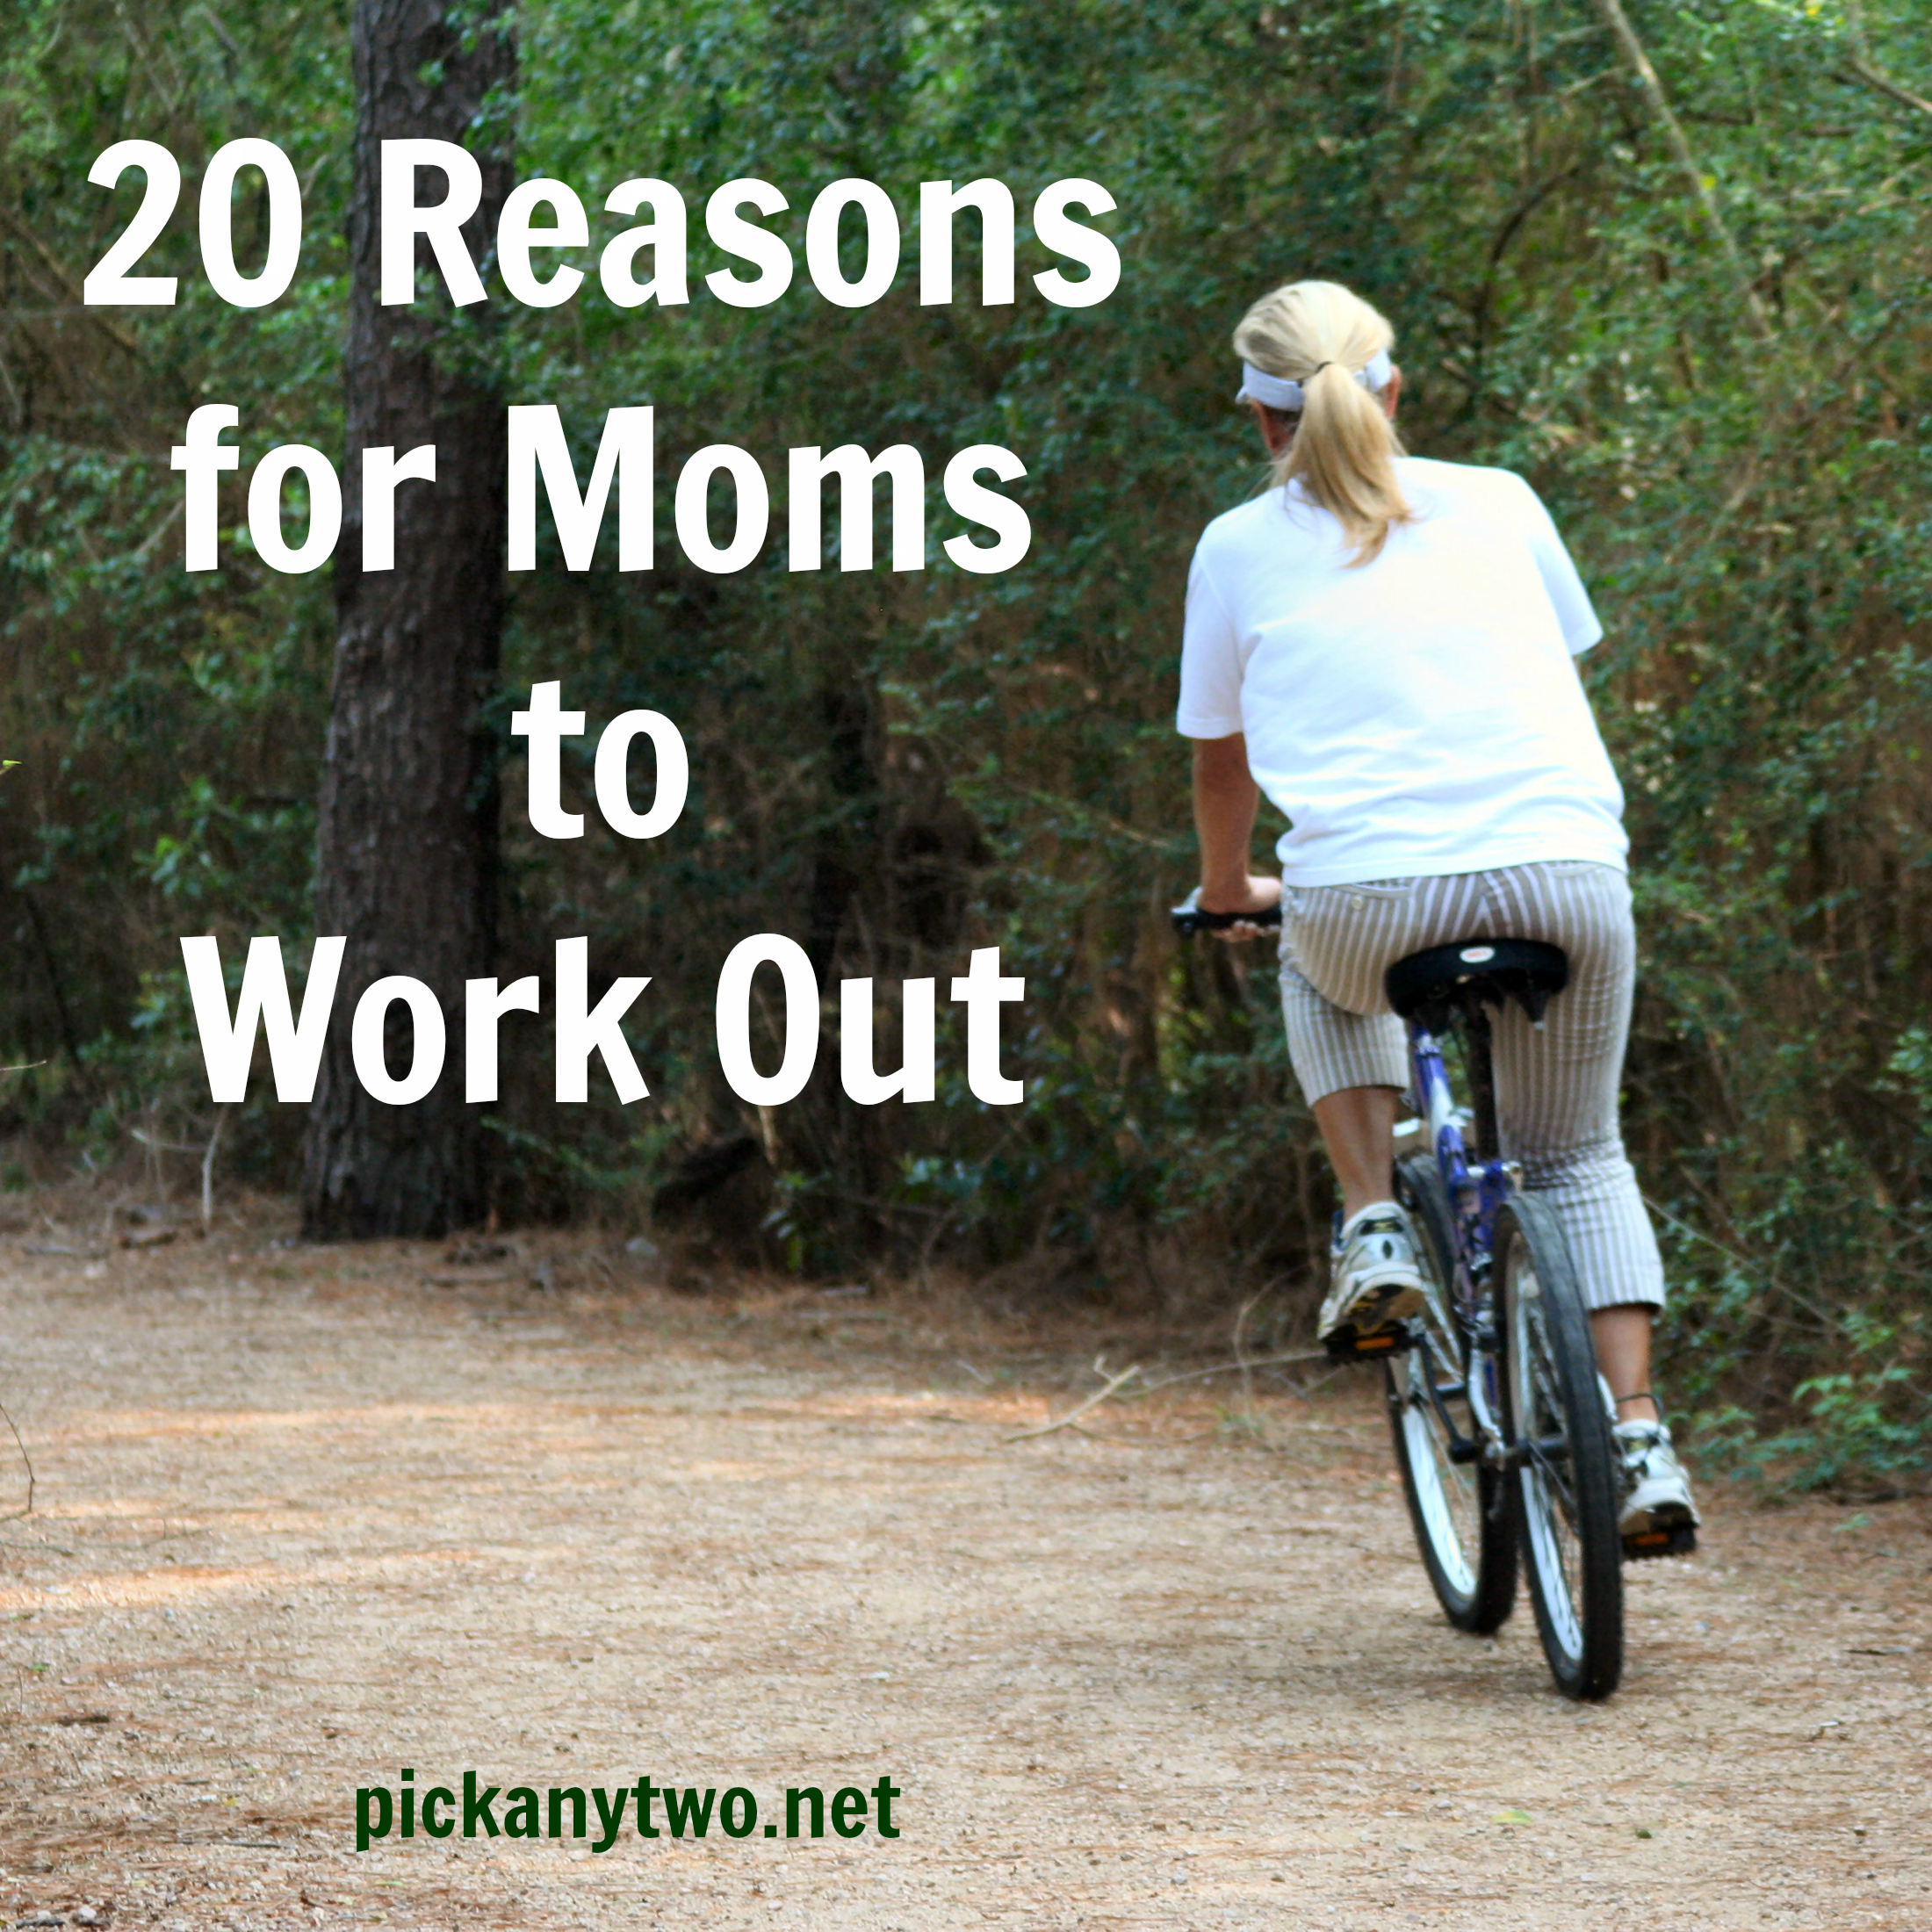 20 Reasons for Moms to Work Out